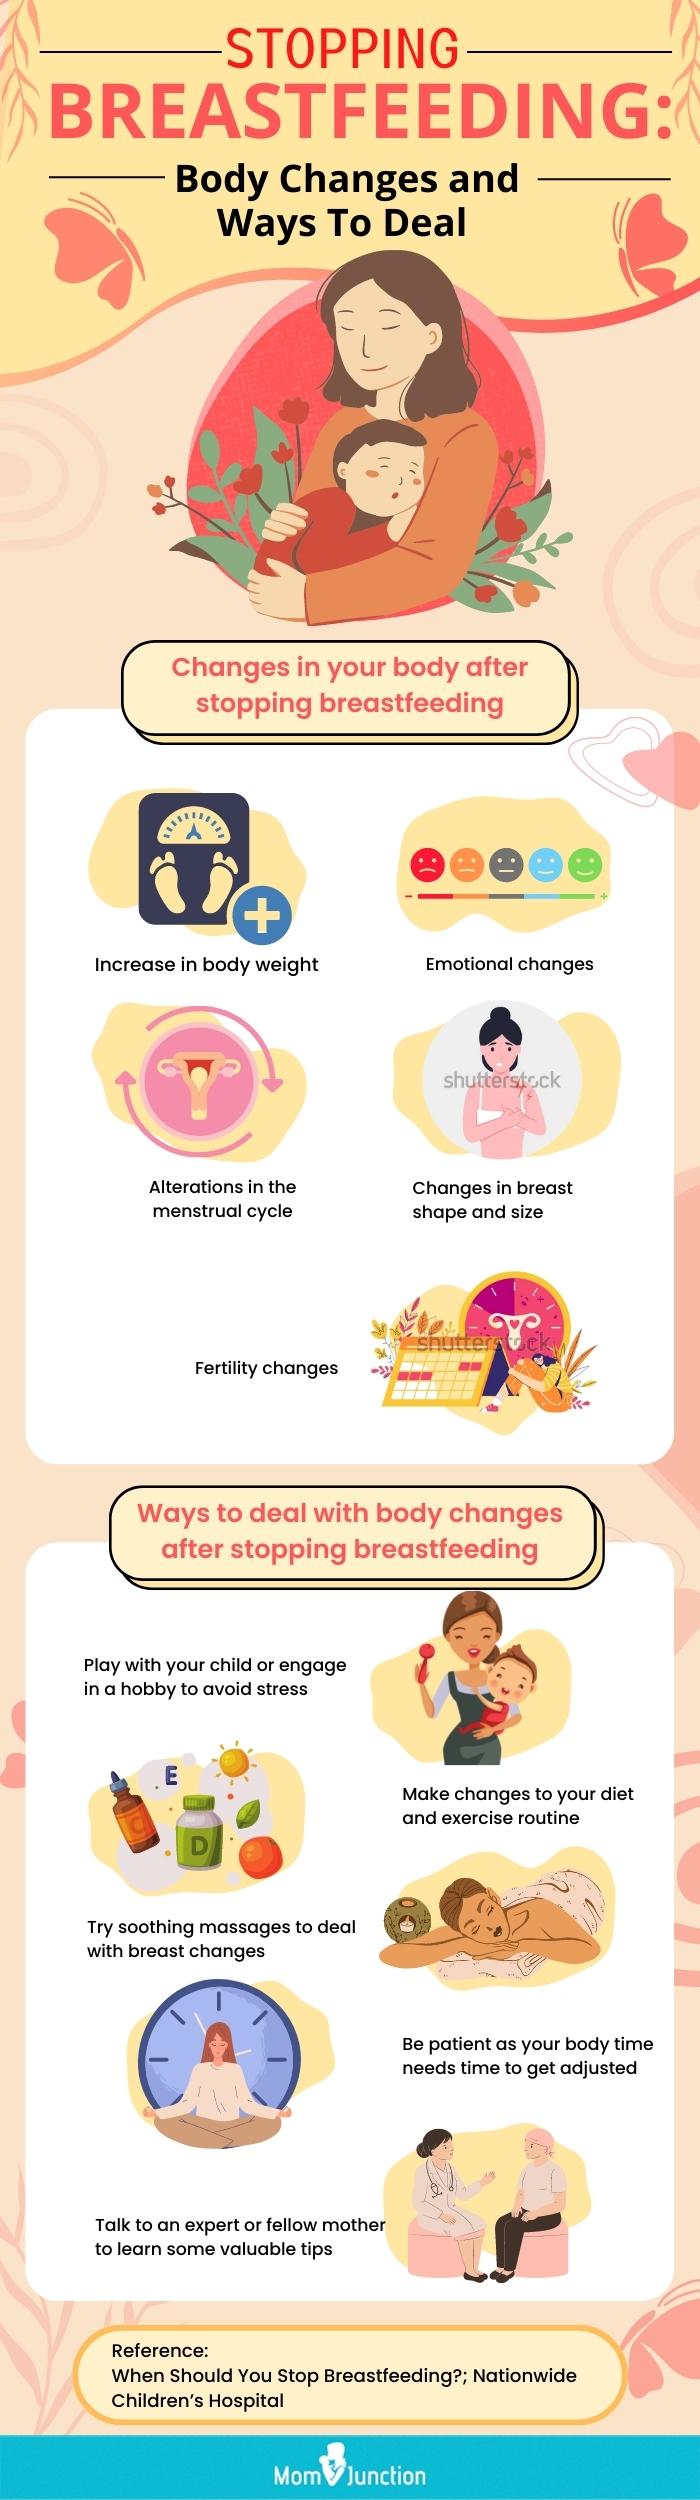 When and How to Stop Breastfeeding: A Comprehensive Weaning Guide